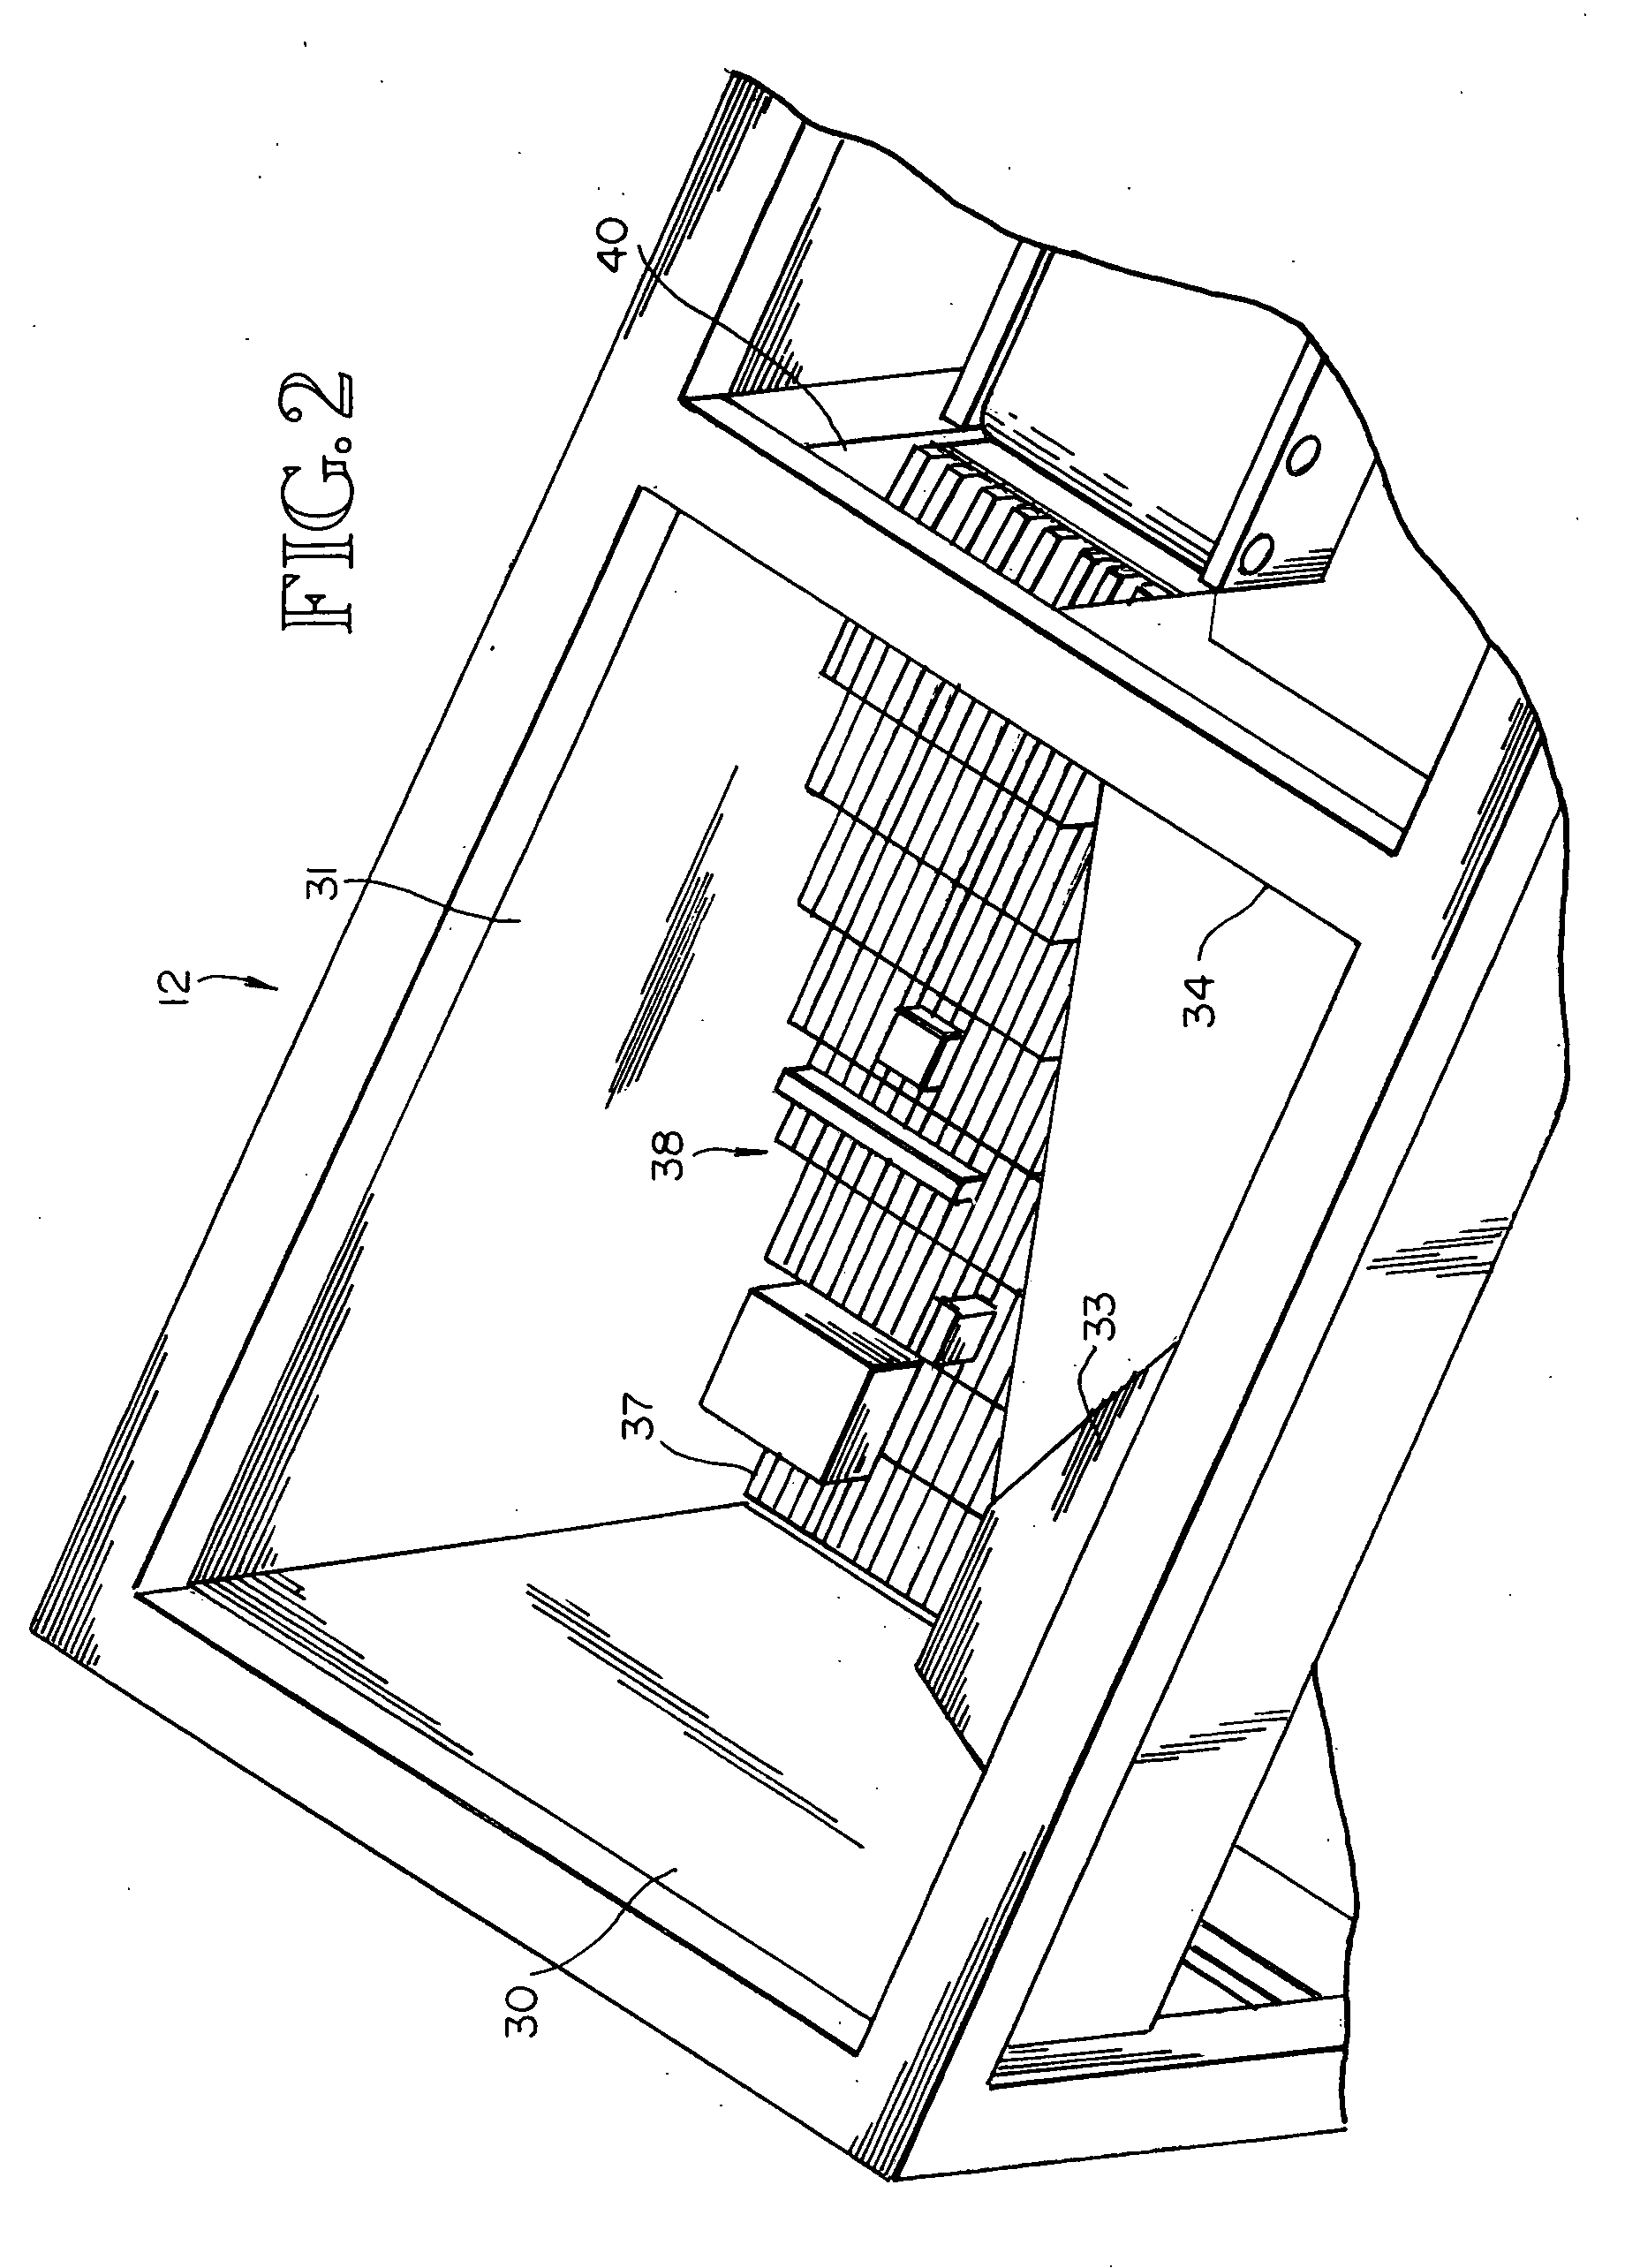 Automatic apparatus for storing and dispensing packaged medication and other small elements